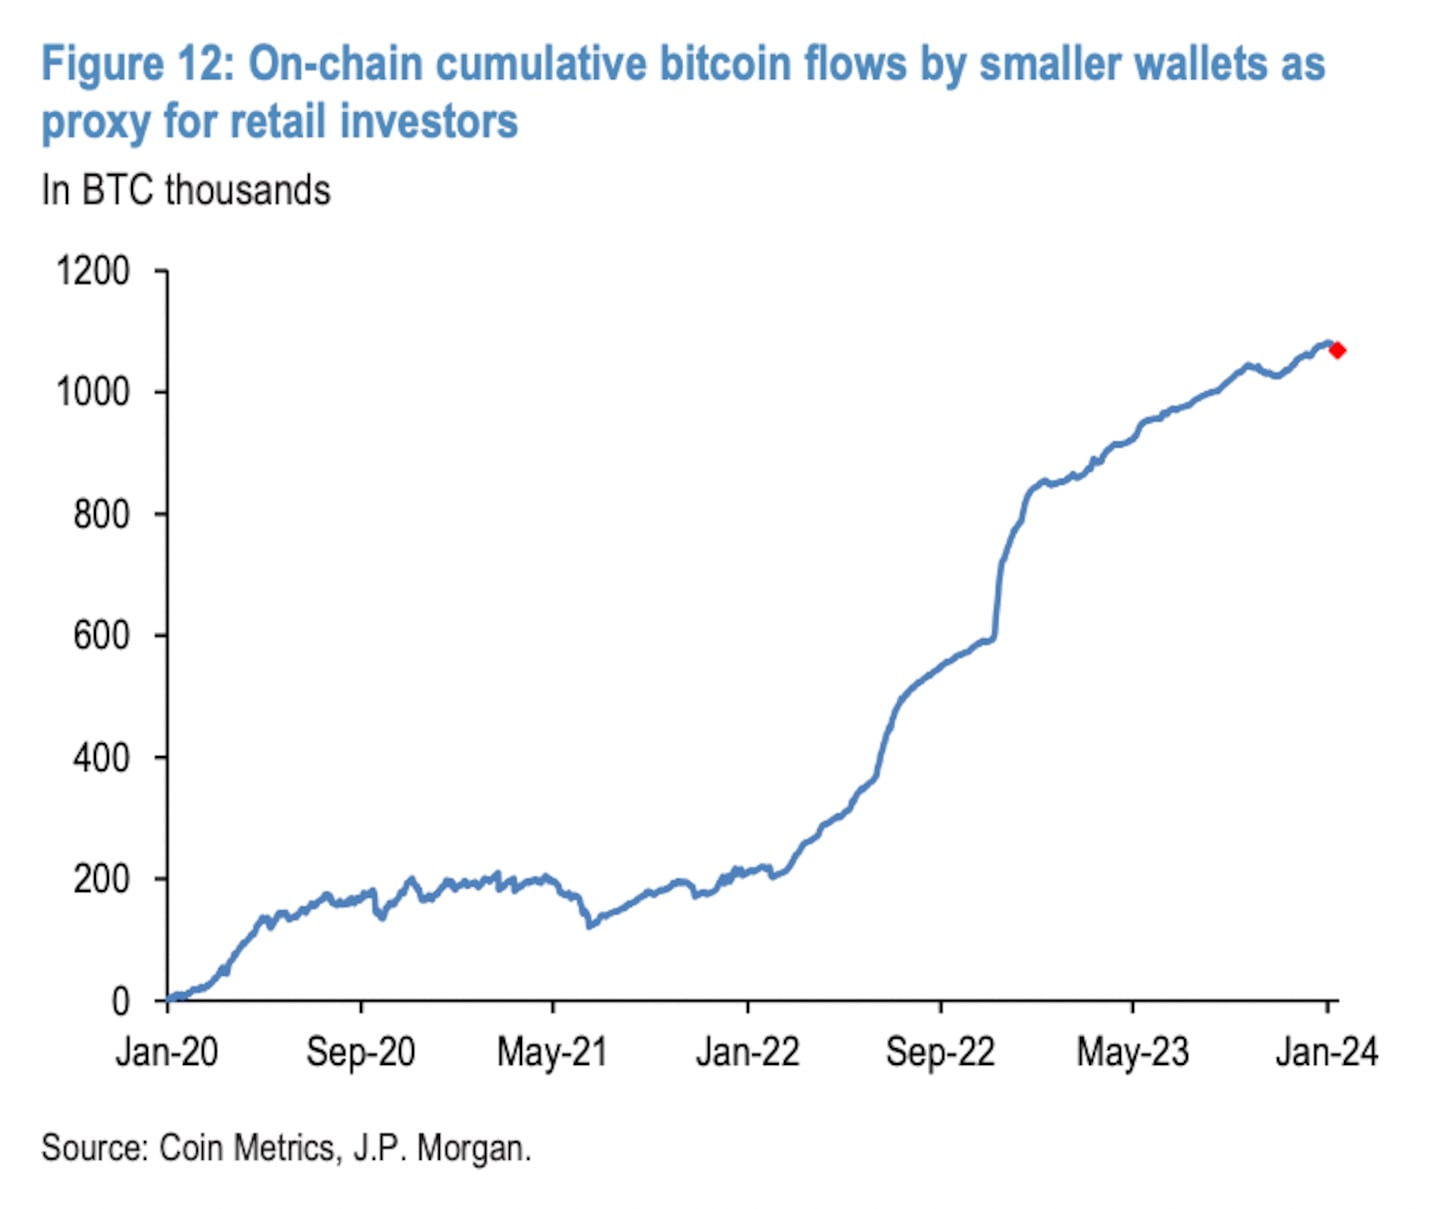 On-chain cumulative Bitcoin flows by smaller wallets.